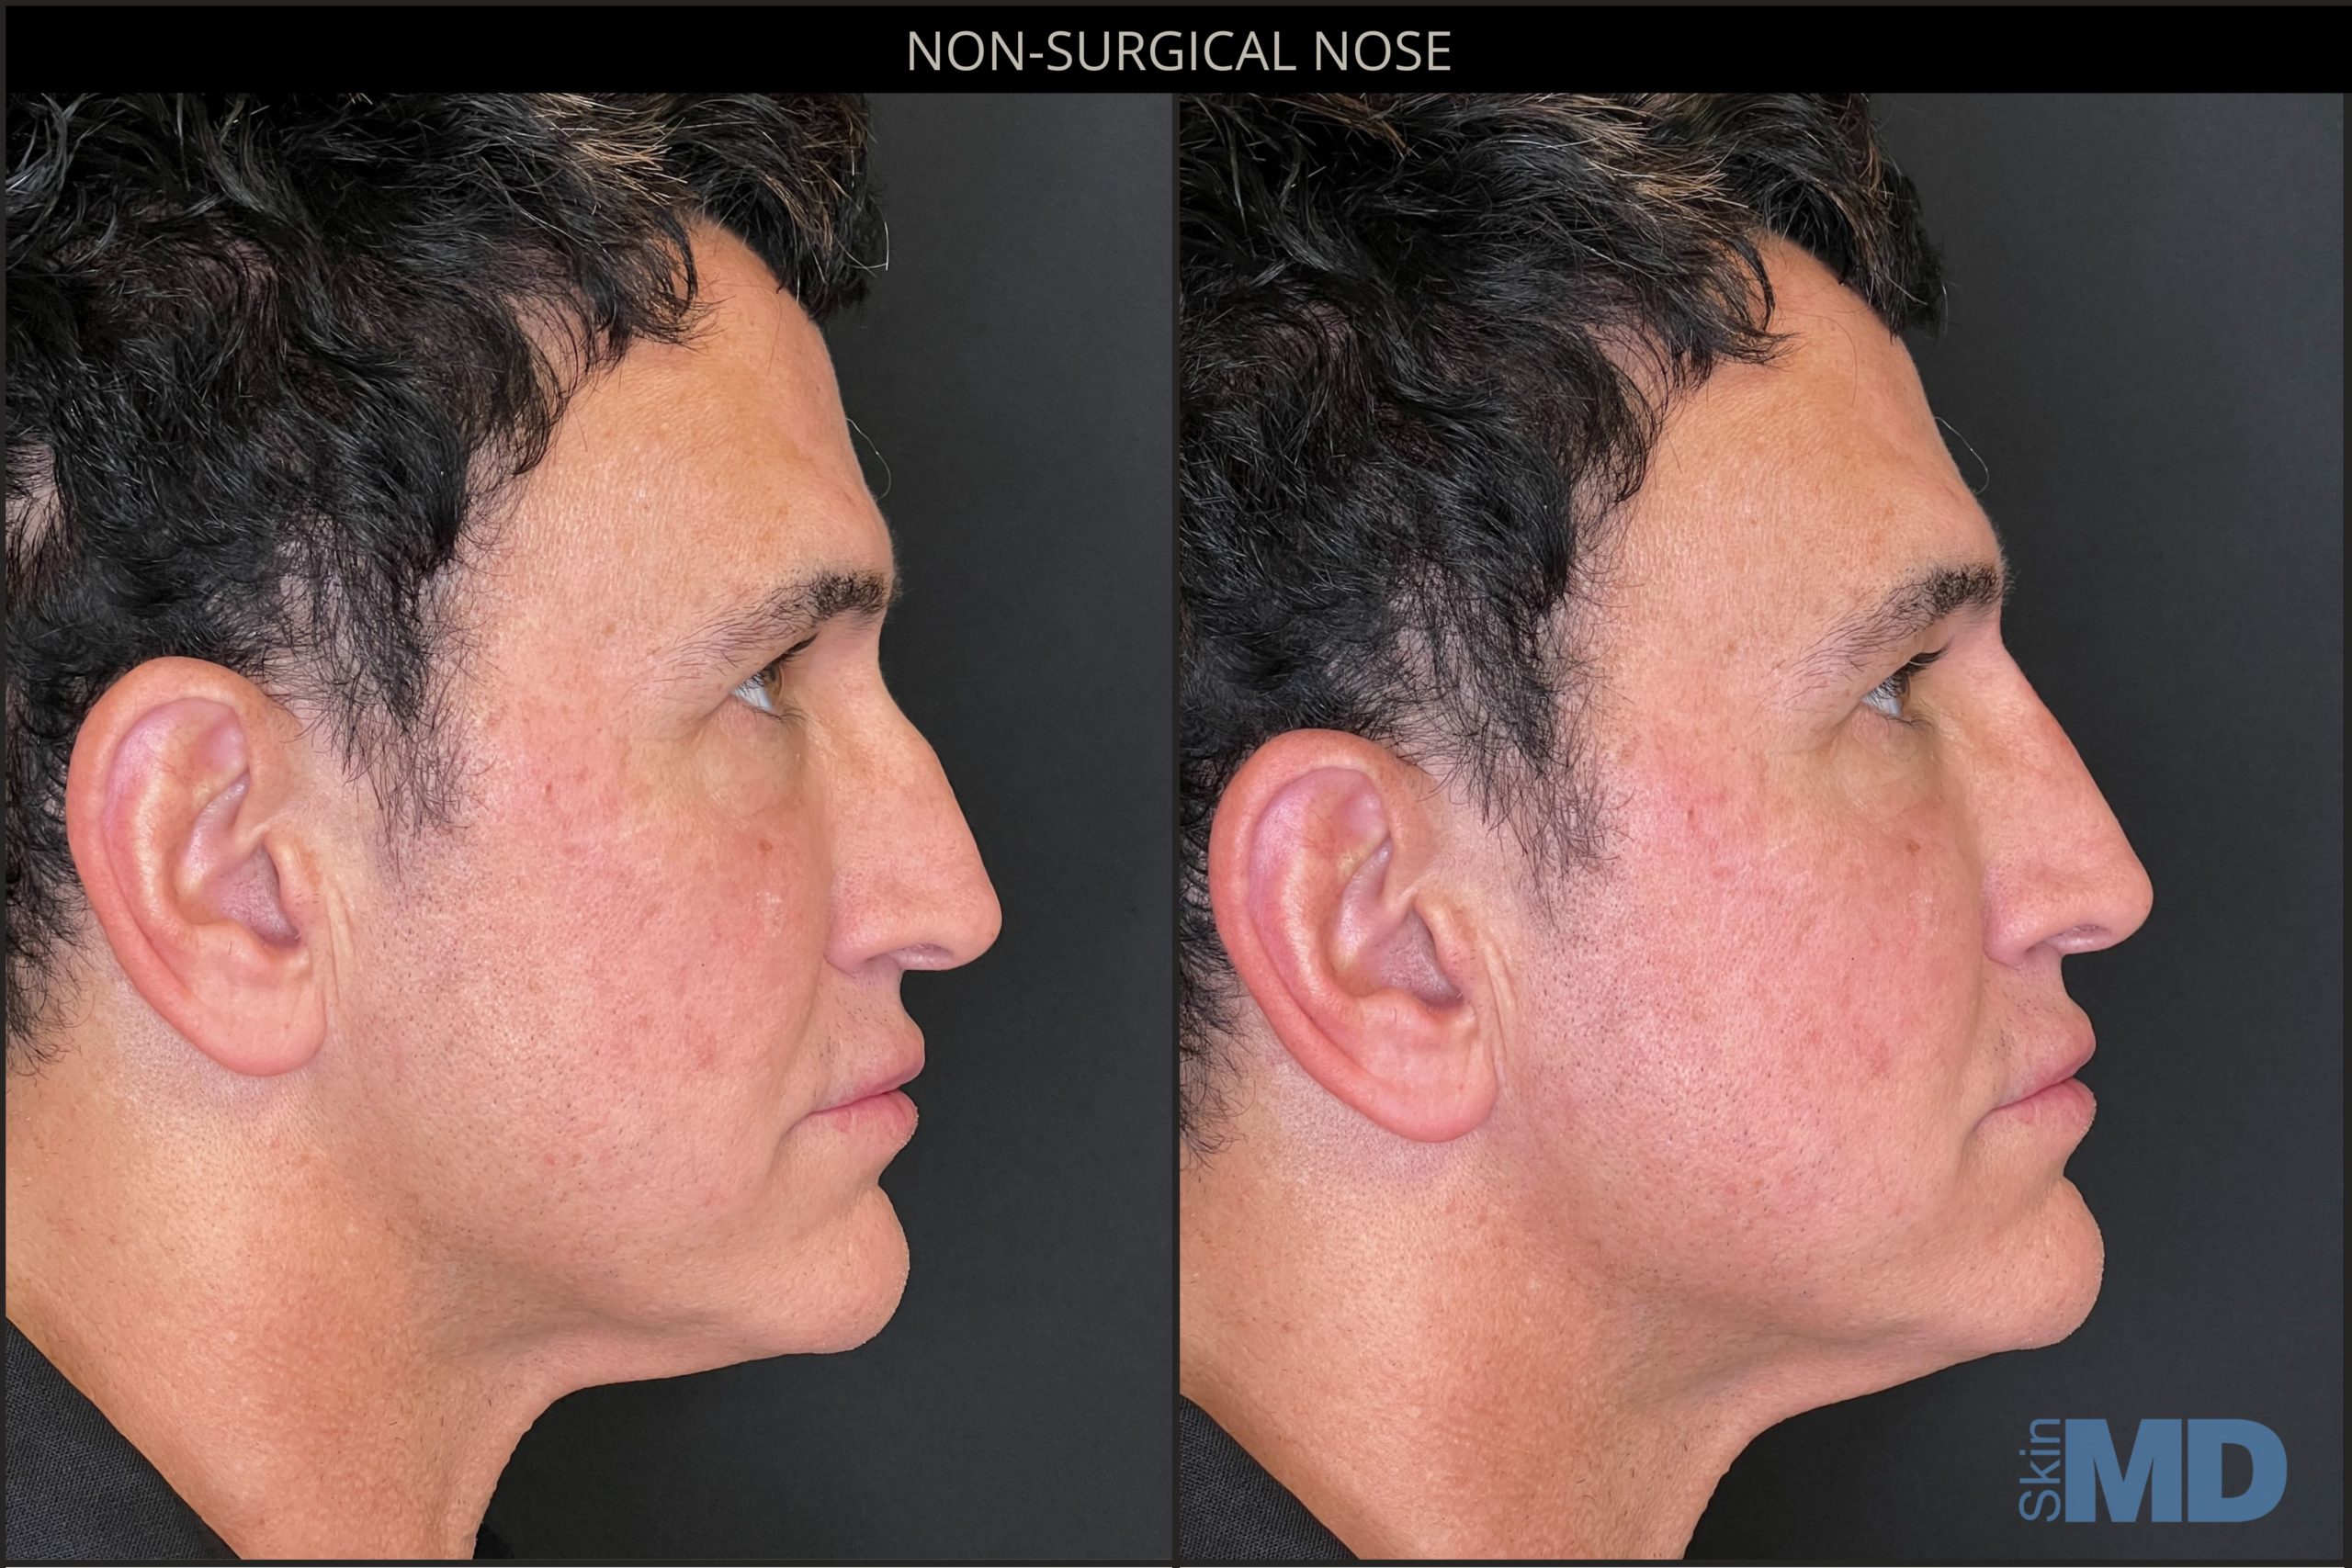 Before and after non-surgical nose treatment results